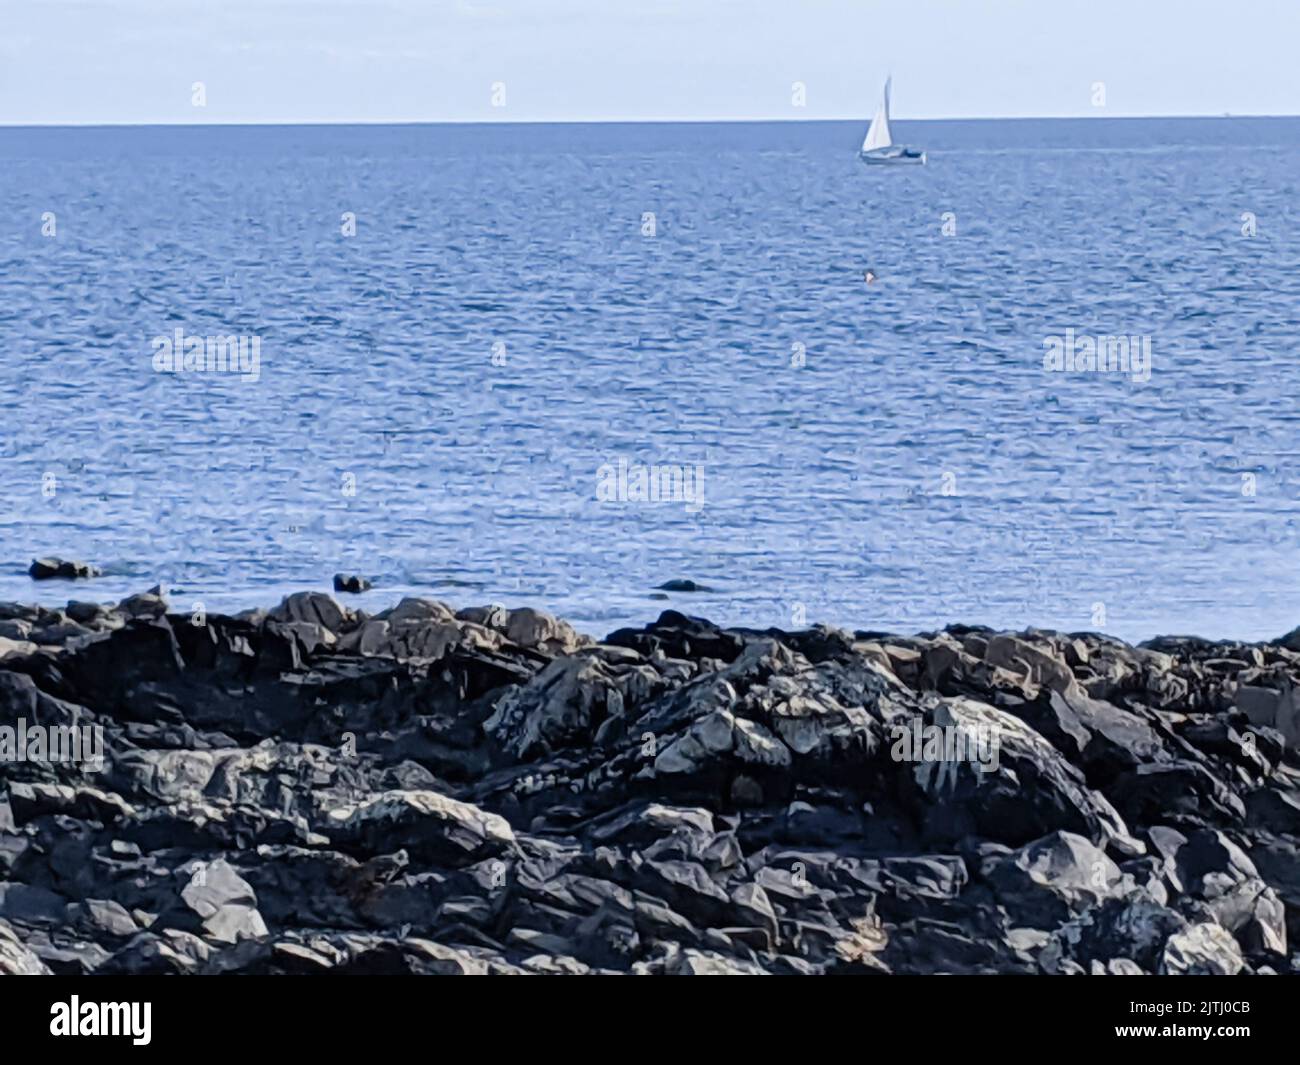 Small yacht far out at sea with coastal rocks in the foreground. Stock Photo